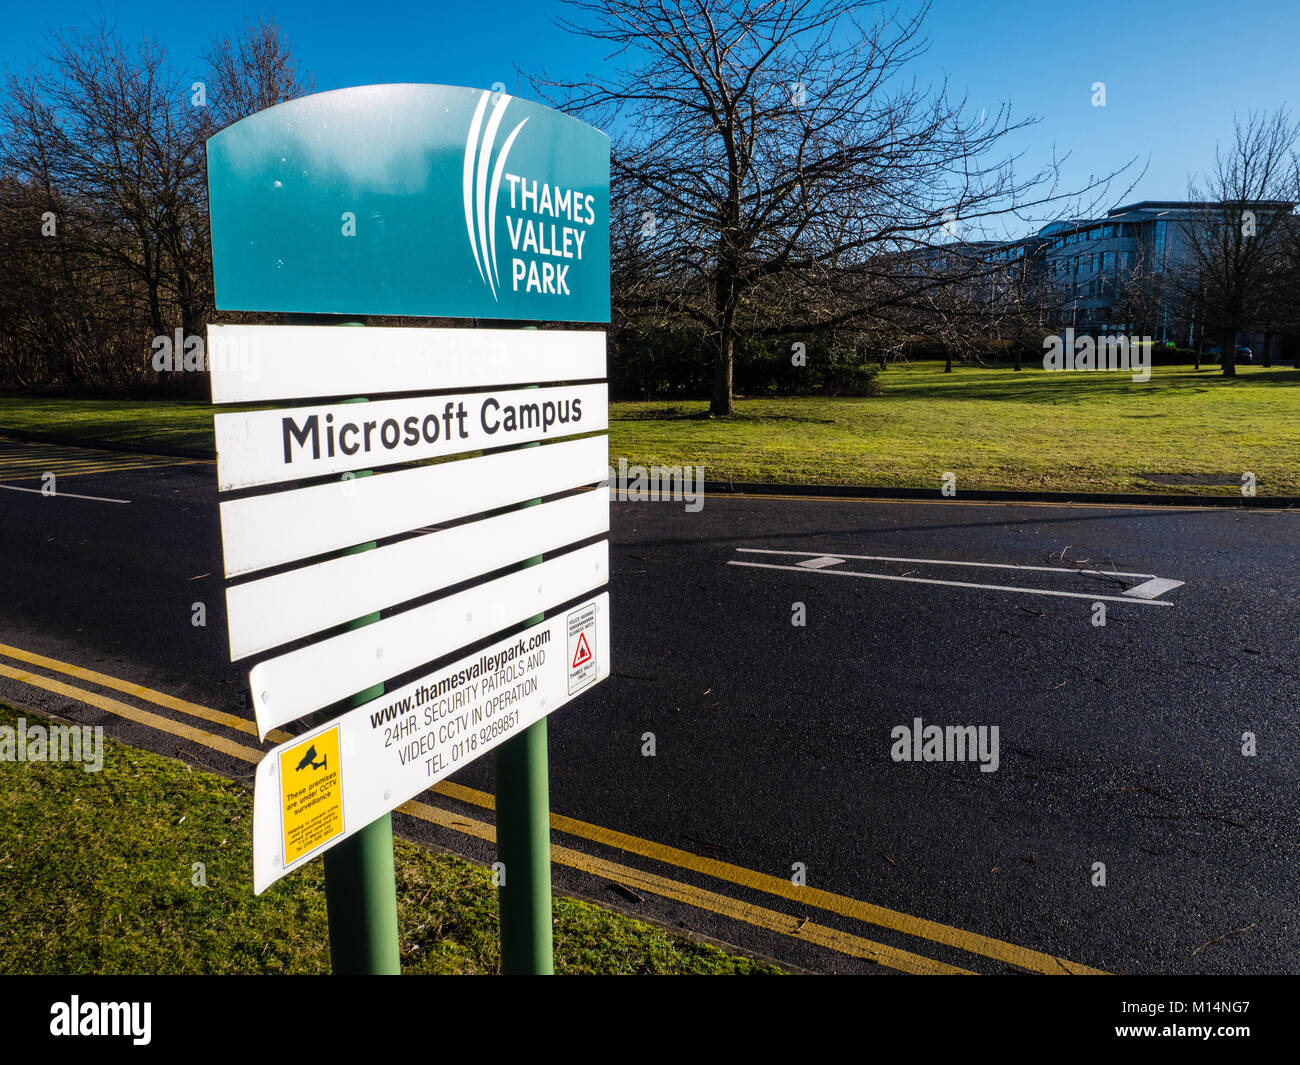 Campus Microsoft Signe, Thames Valley Business Park, Reading, Berkshire, Angleterre Banque D'Images